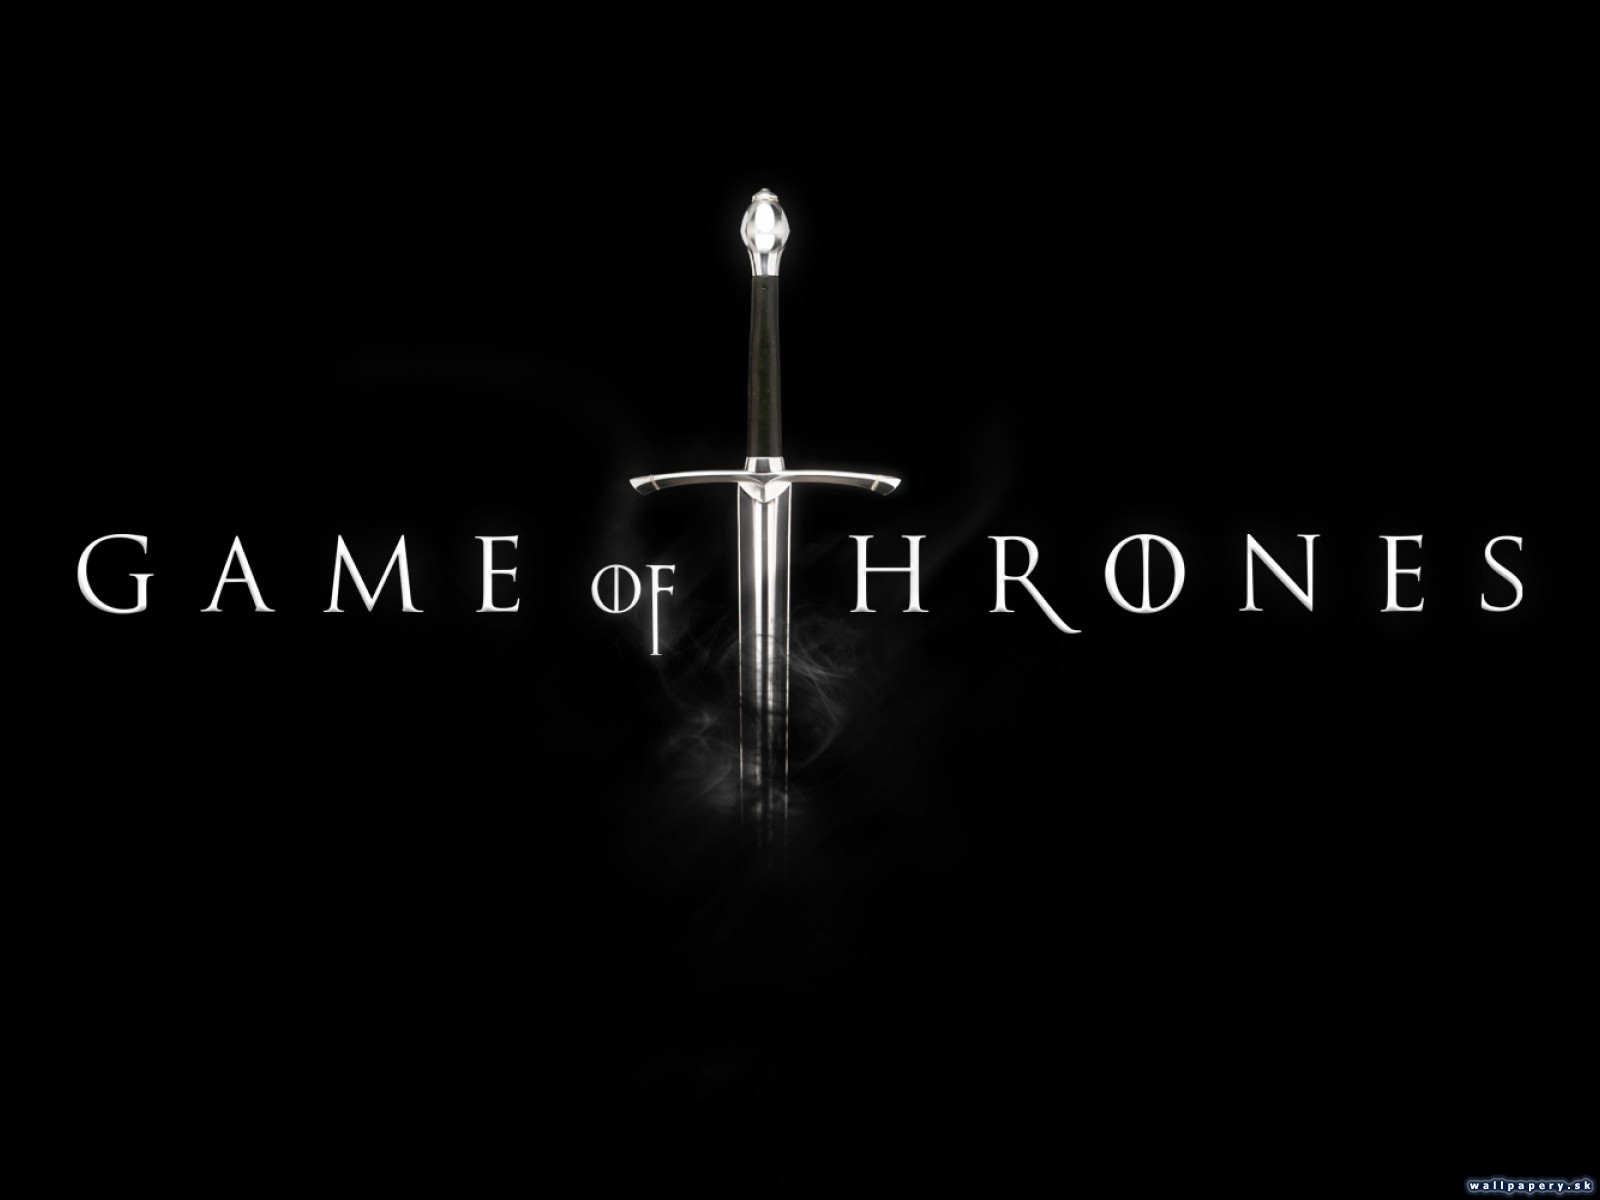 Game of Thrones - wallpaper 5